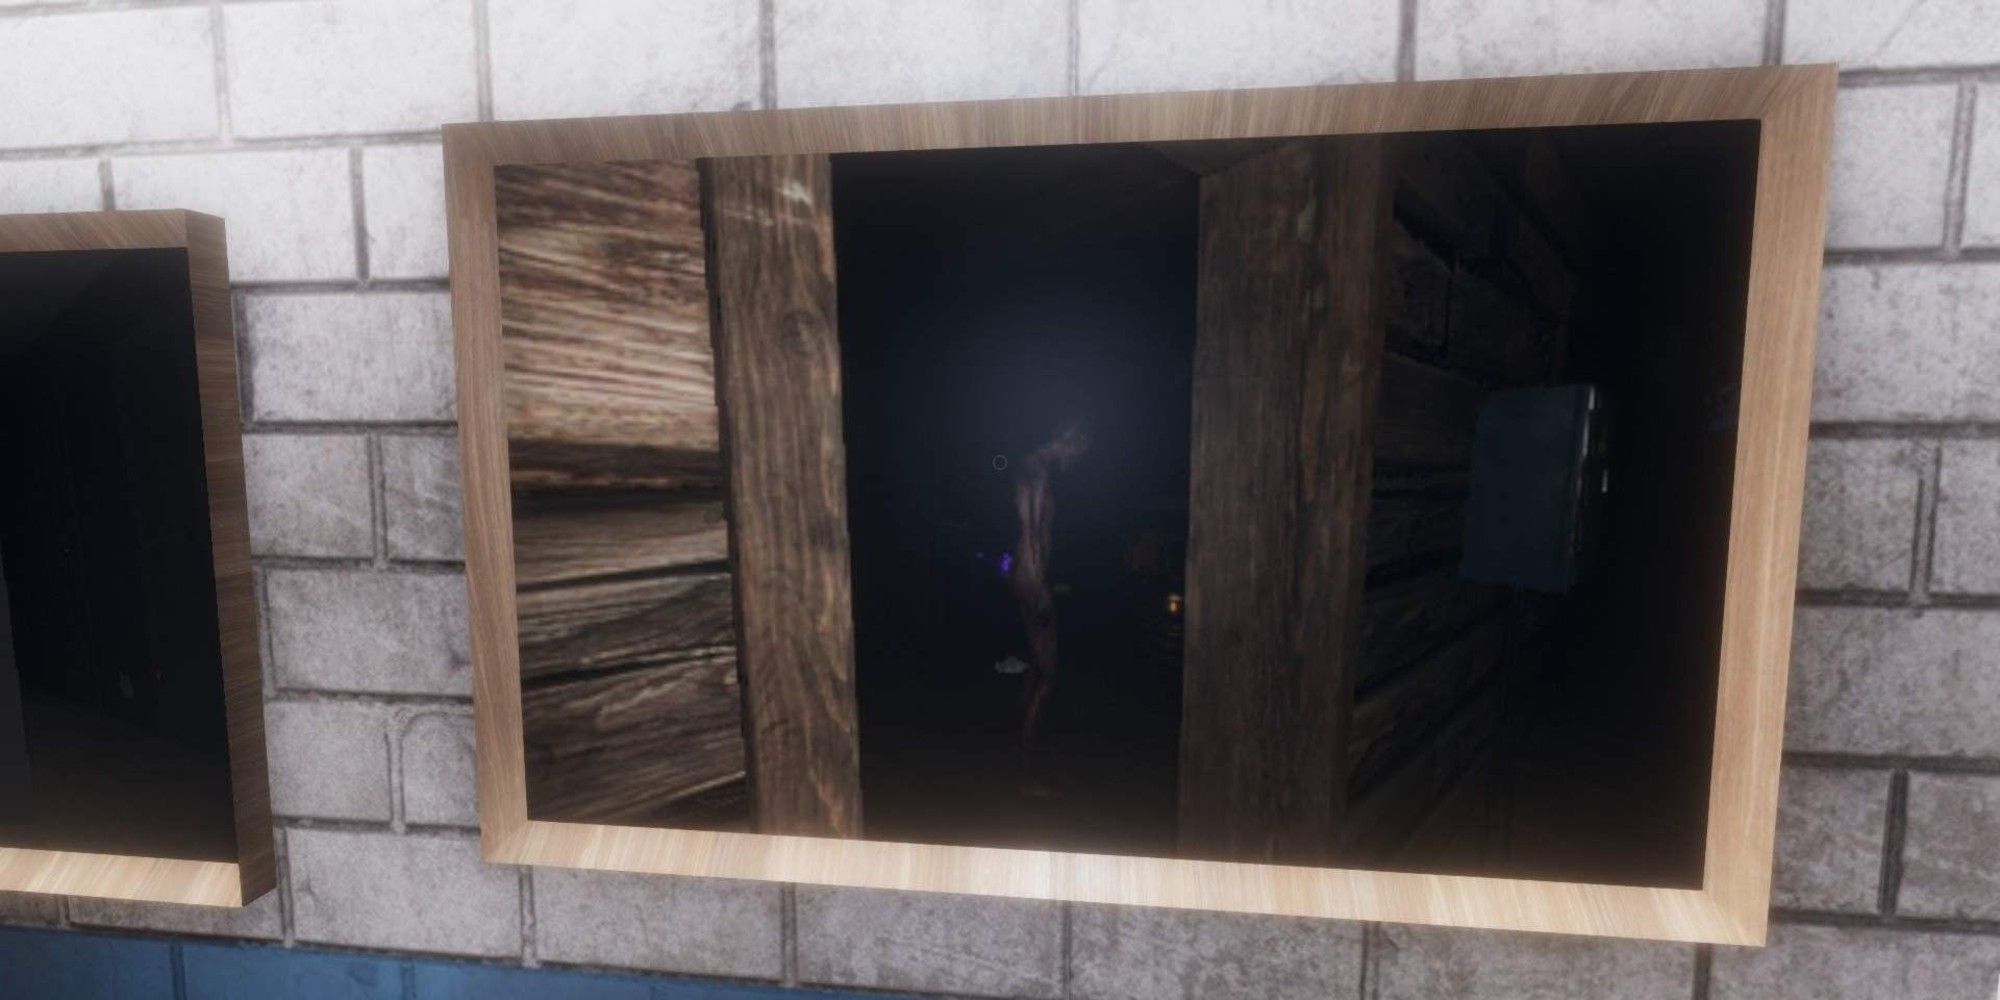 A player captures a photo of a ghost through a mirror in Phasmophobia